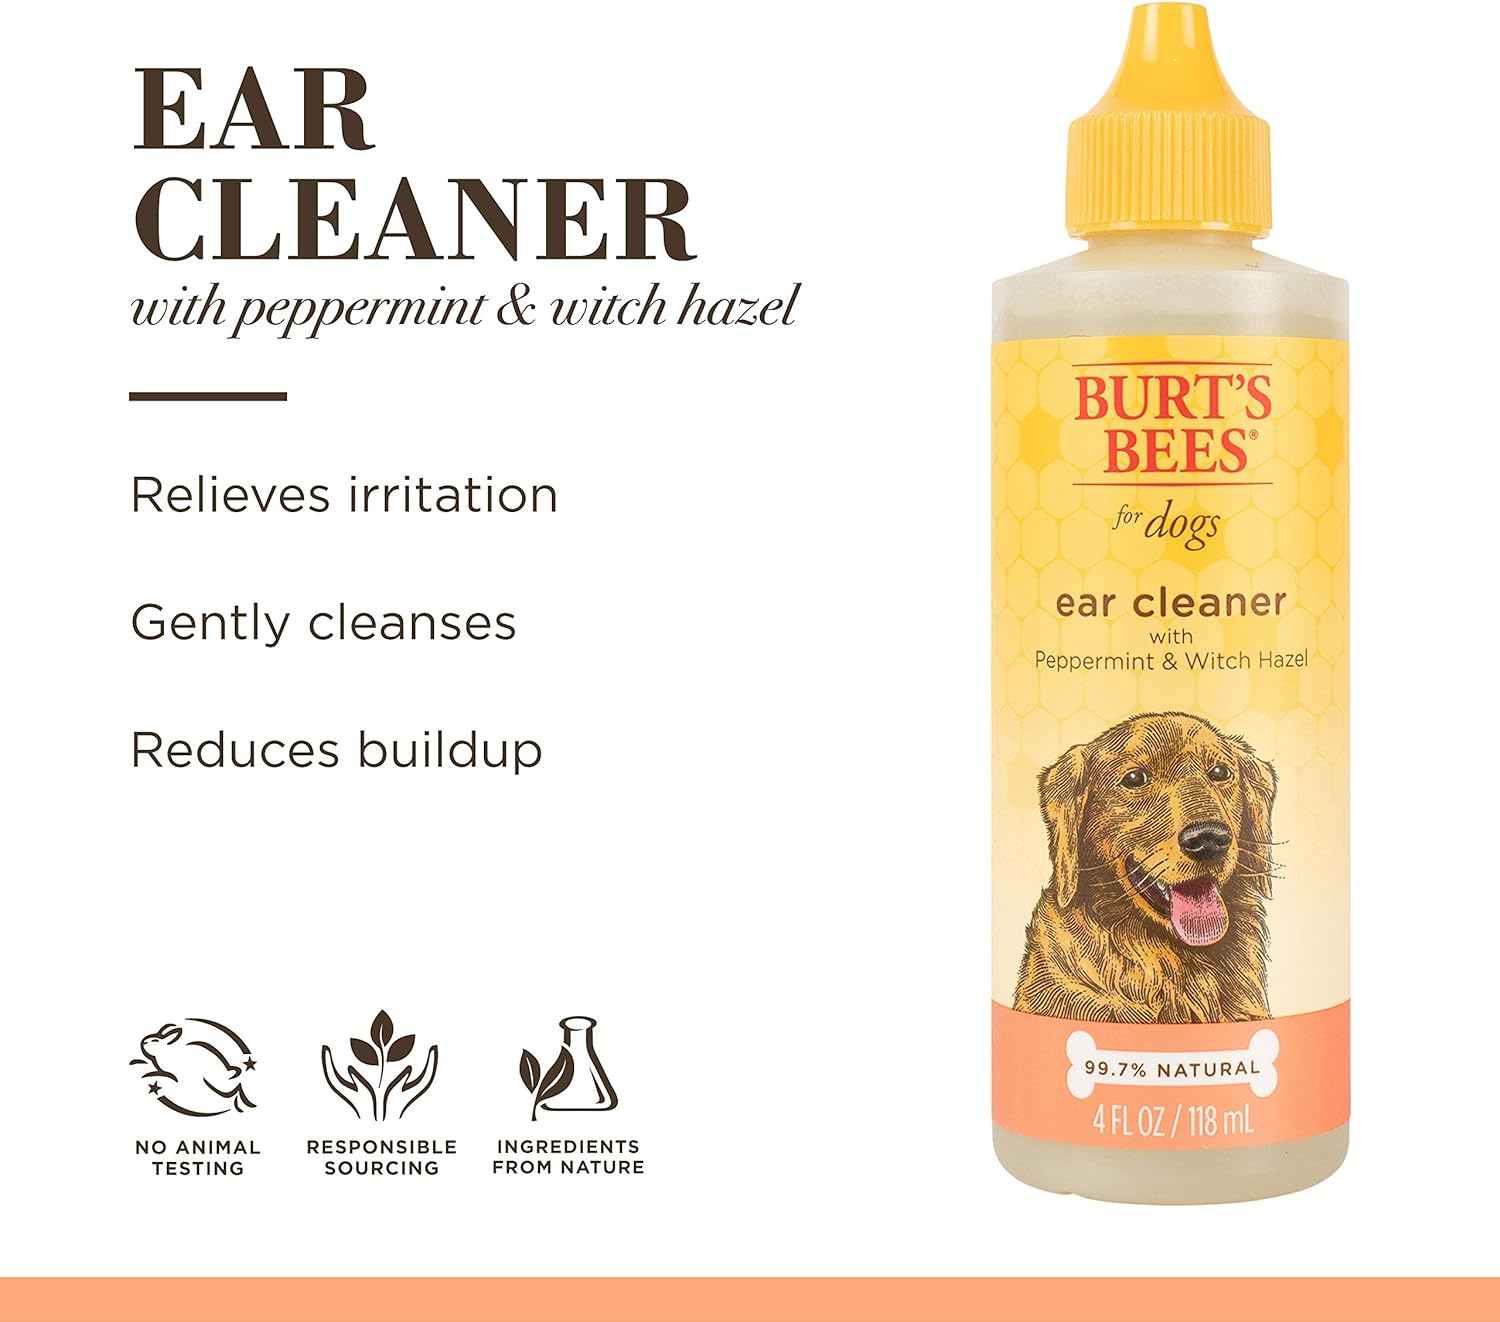 Burt's Bees for Pets Natural Ear Cleaner with Peppermint & Witch Hazel | Effective & Gentle Dog Ear Cleaning Solution for All Dogs | Cruelty Free, Made in USA, 4 Oz- 2 Pack : Pet Supplies